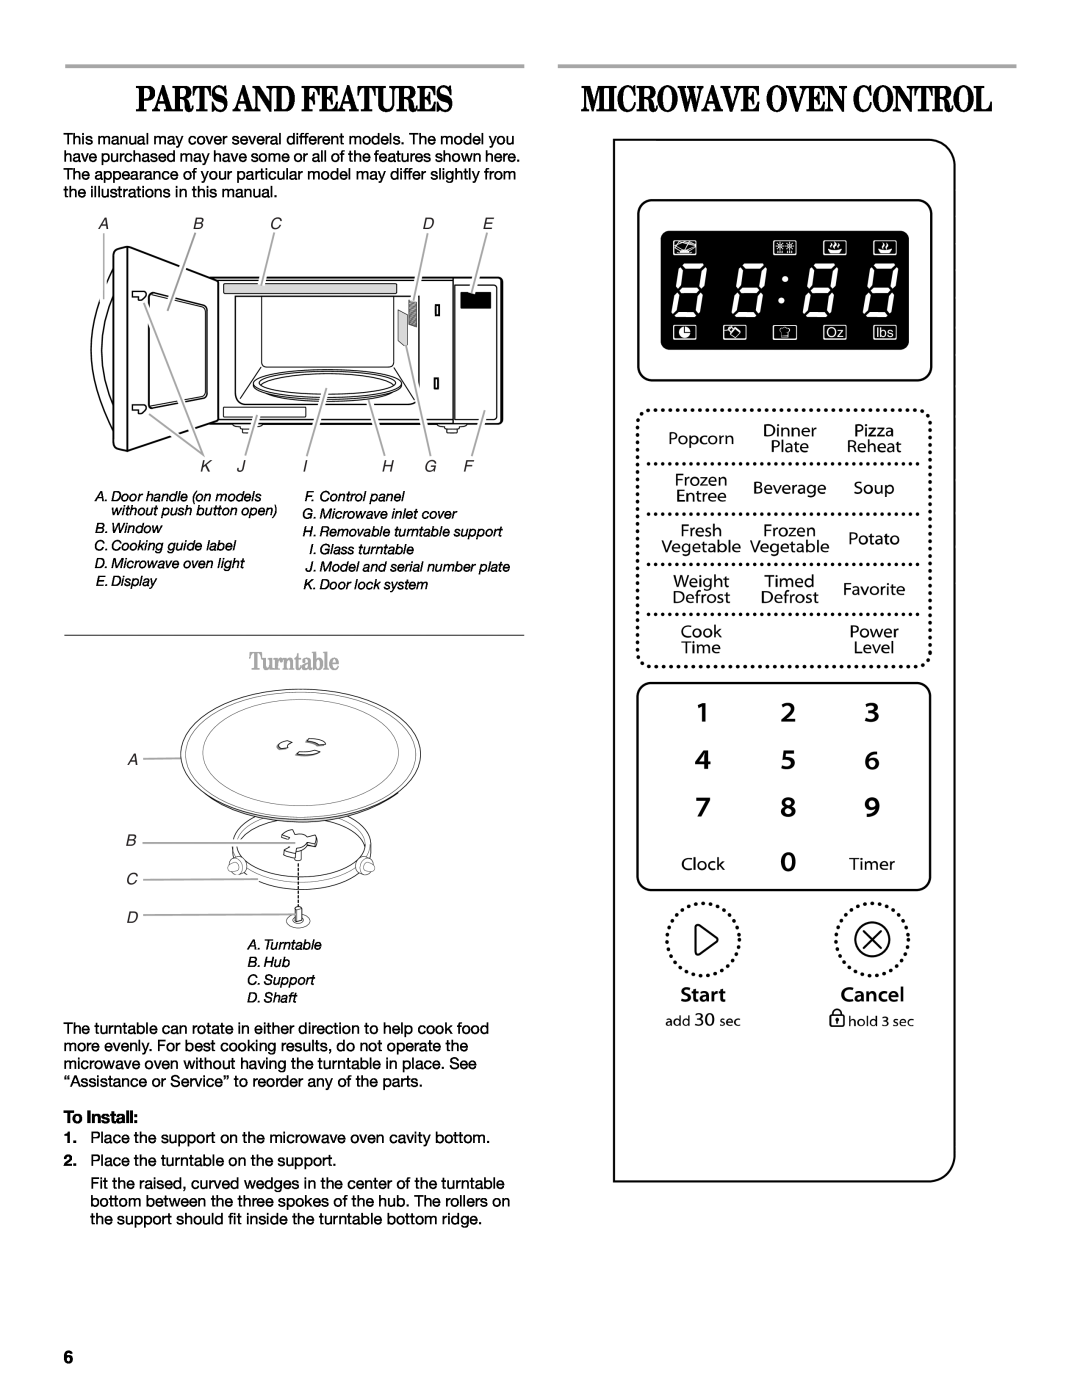 Whirlpool WMC30516AS manual Parts And Features, Microwave Oven Control, Turntable, Ab Cd E, I H G F, A B C D 